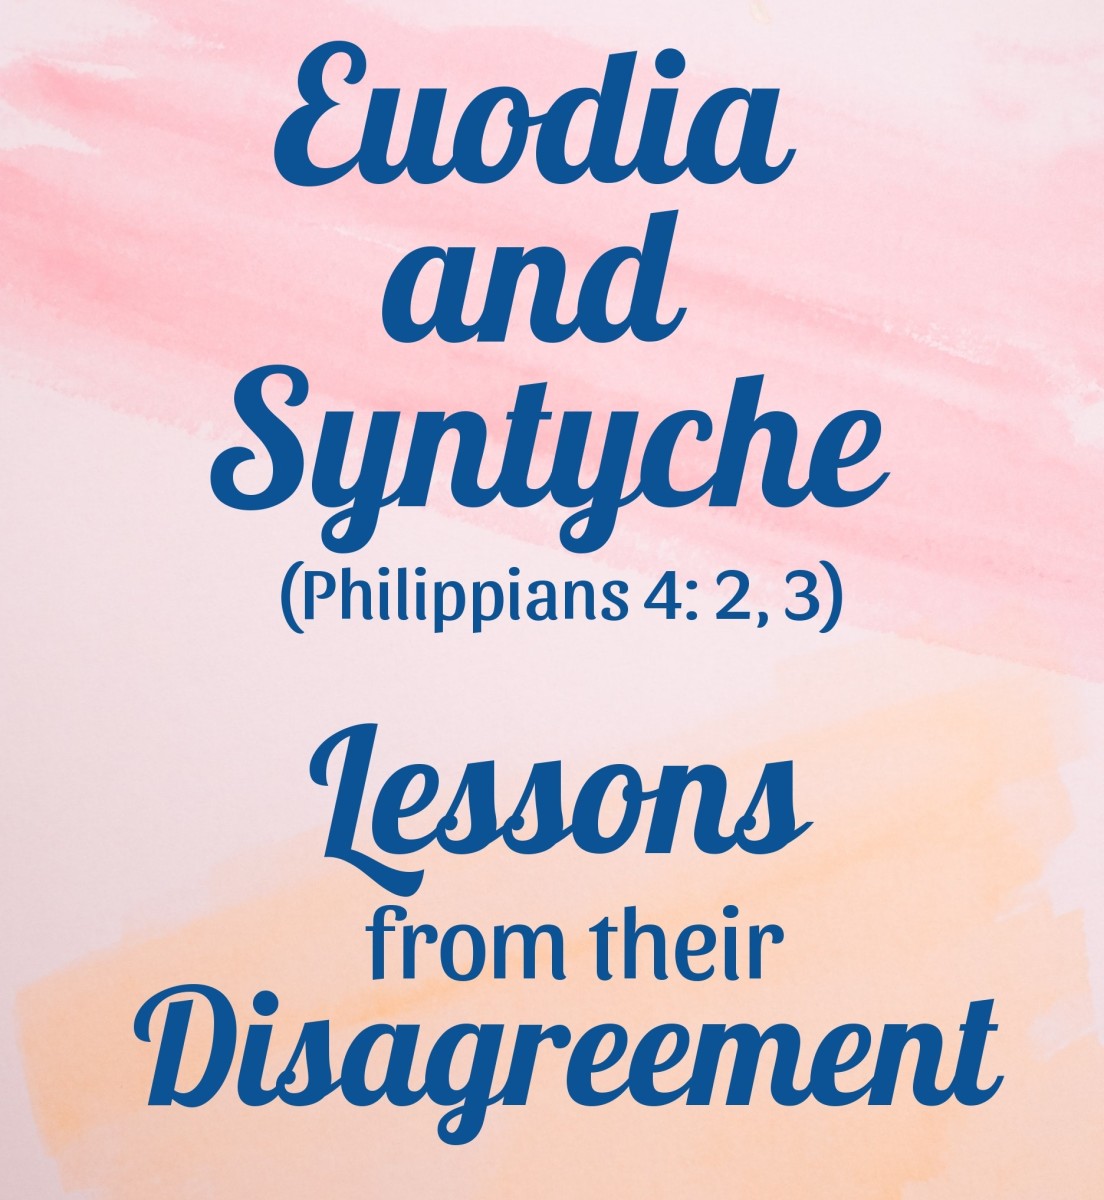 Euodia and Syntyche: Lessons From Their Disagreement